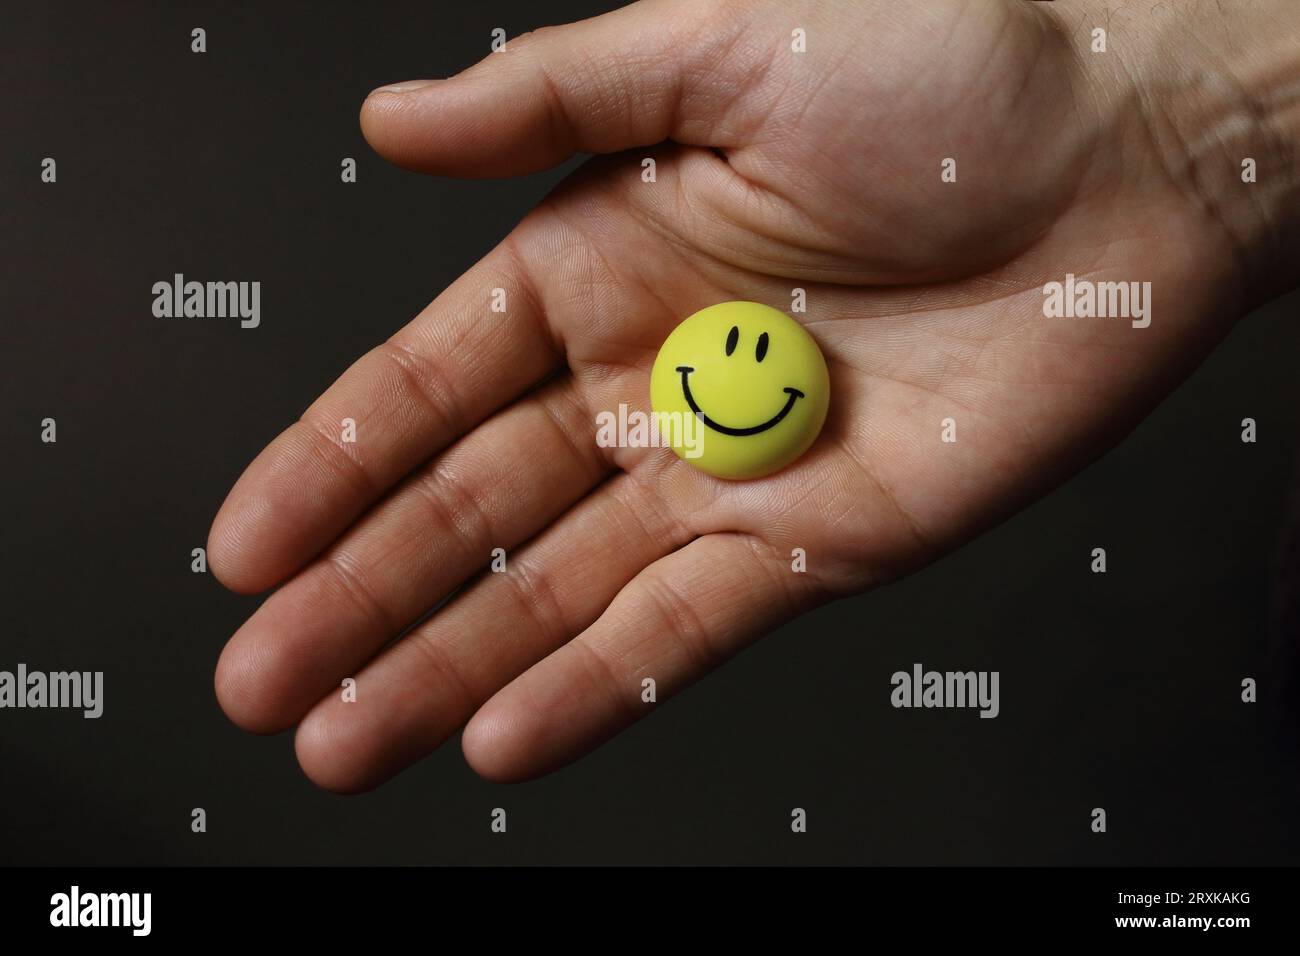 Yellow smiling face on open palm. Round smile face in open hand. Friendship Day concept. Cheerful emotions. Friendship proposal. Stock Photo